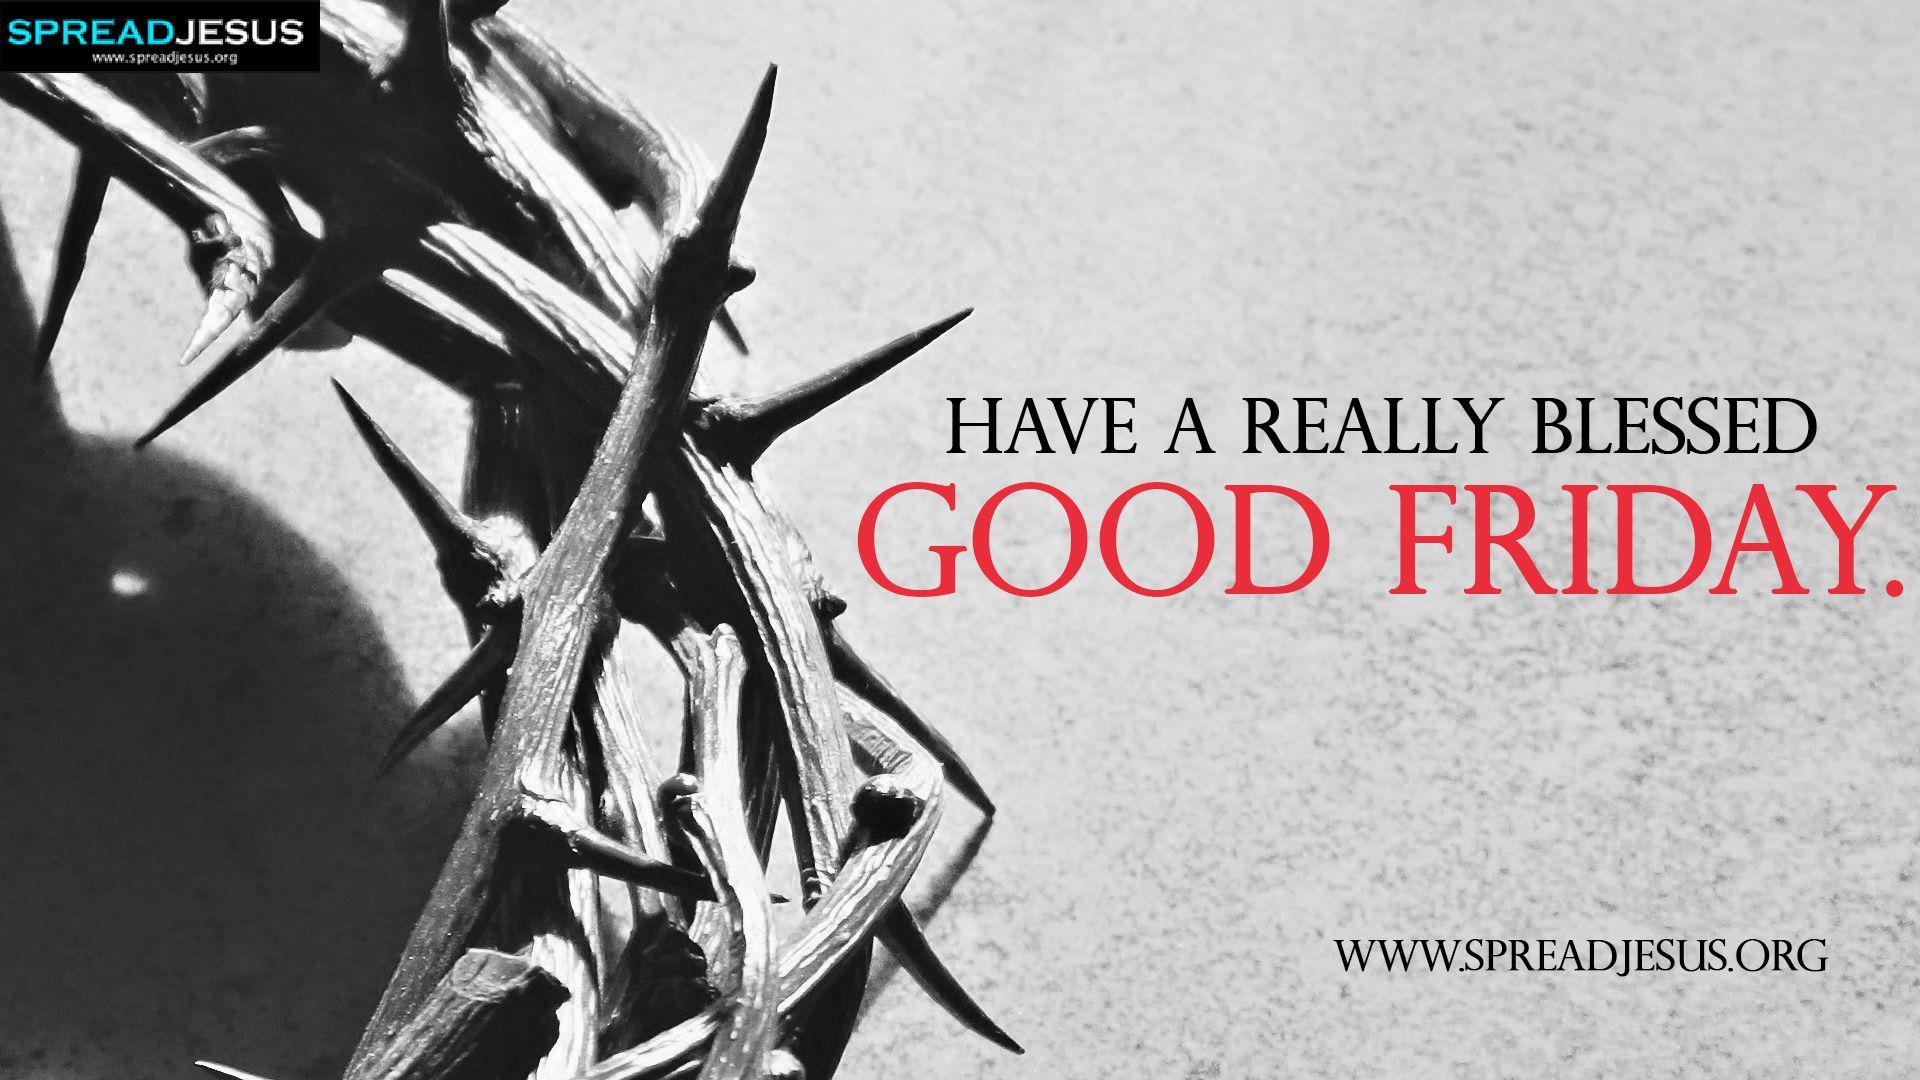 Good Friday HD Wallpaper Have a really blessed Good Friday